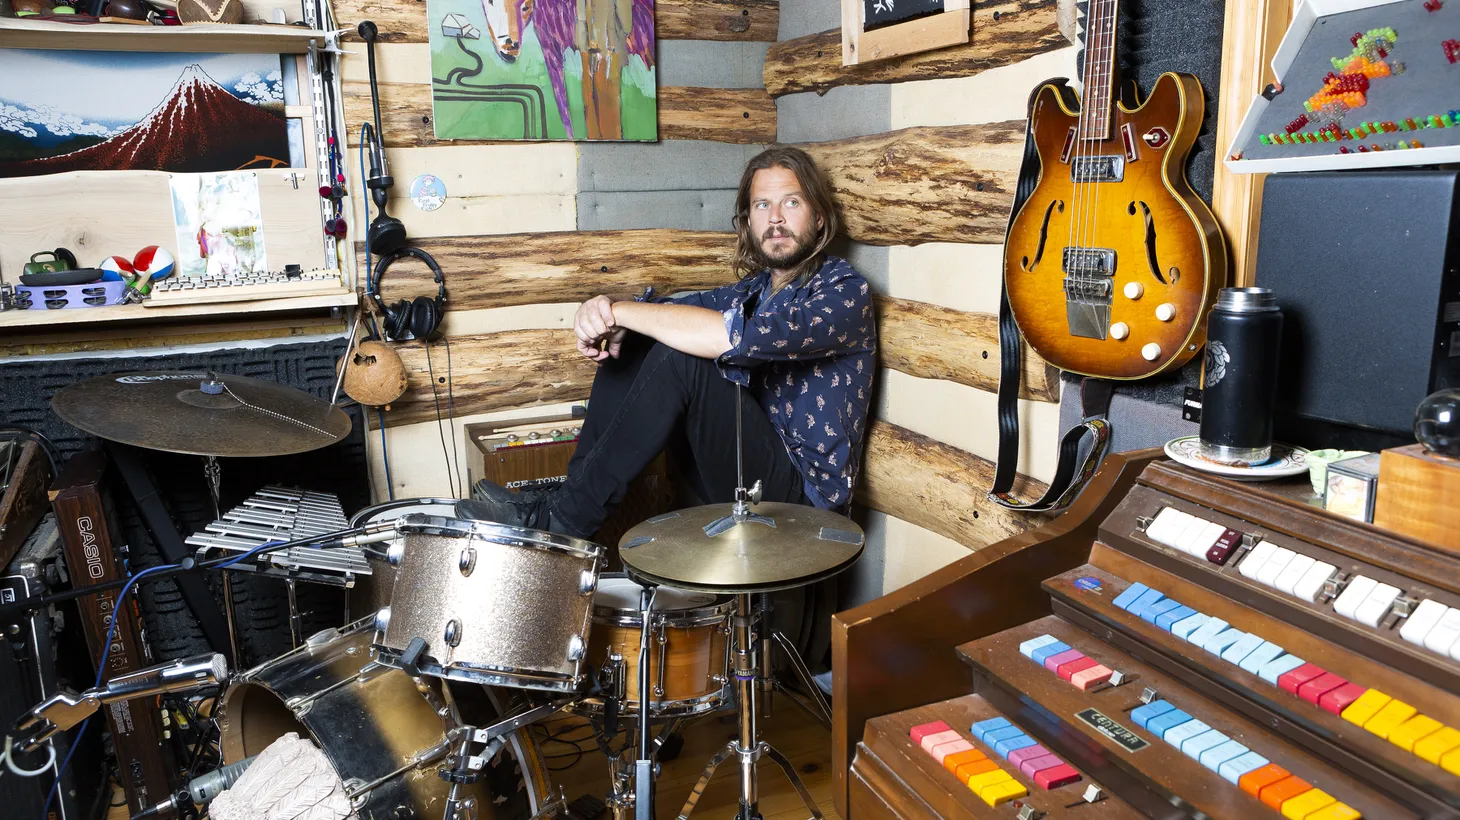 Trippy key wiz Marco Benevento squirreled away in his Woodstock studio amid countless keyboards and gear to create quarantine-inflicted solo jams. The eponymous album “Benevento” was inspired by Macca’s (Paul McCartney) first solo album.